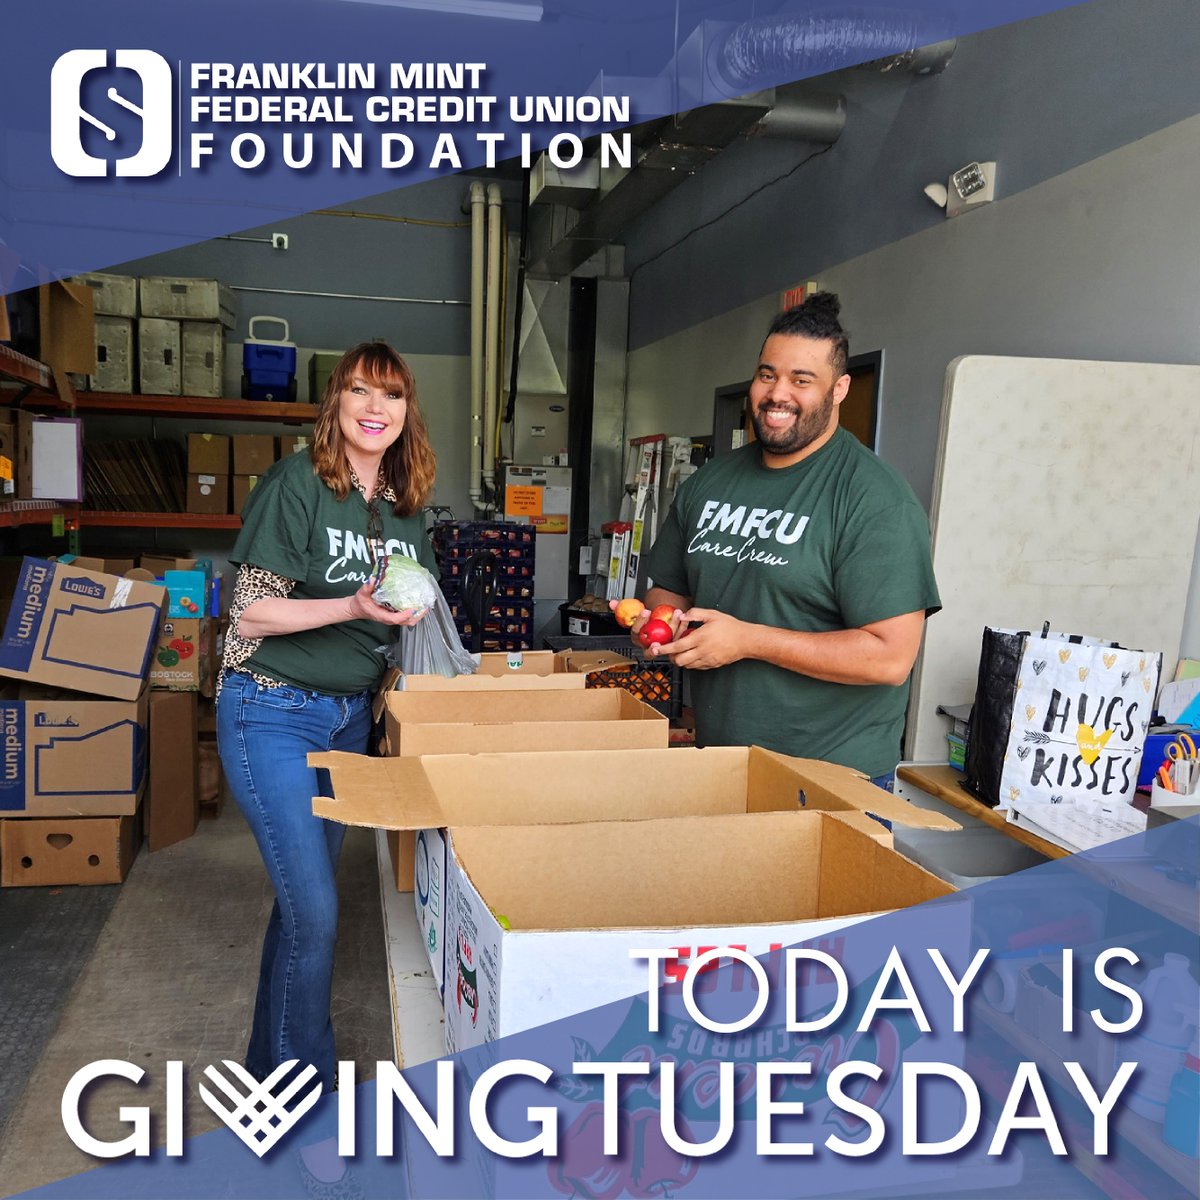 It's #GivingTuesday! Thank you to all that have donated to our Food Insecurity Fund. There is still time to help feed our neighbors! fmfcufoundation.org/donate @FMFCU